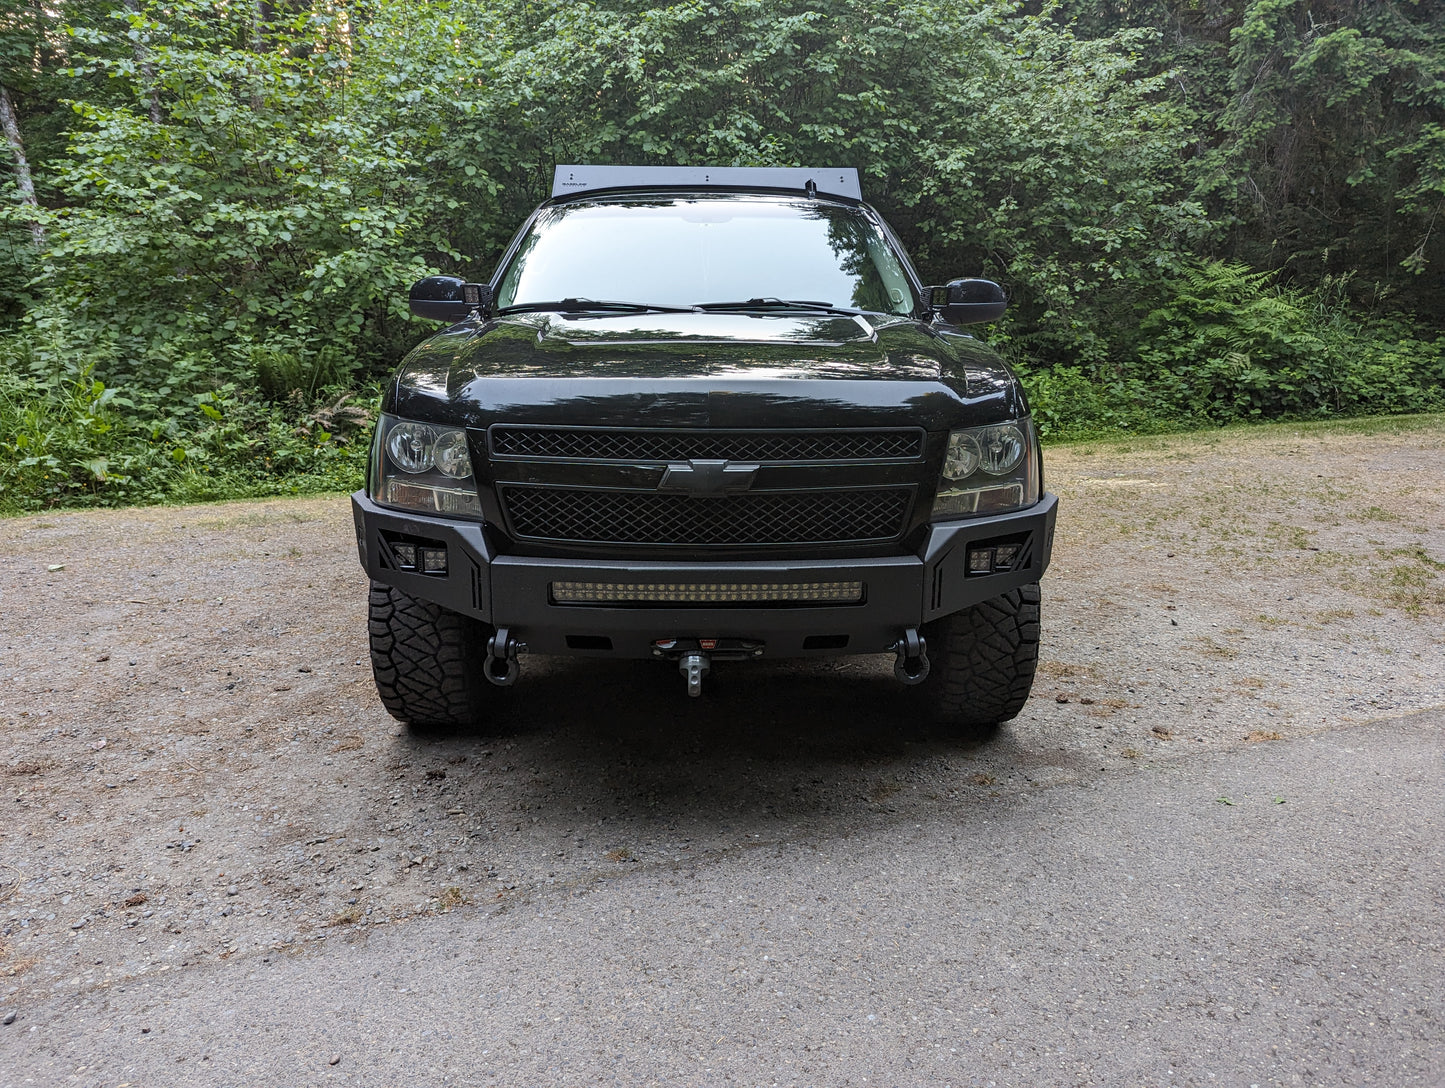 Black Tahoe with Baseline Overland Roof Rack and Octane Winch Bumper